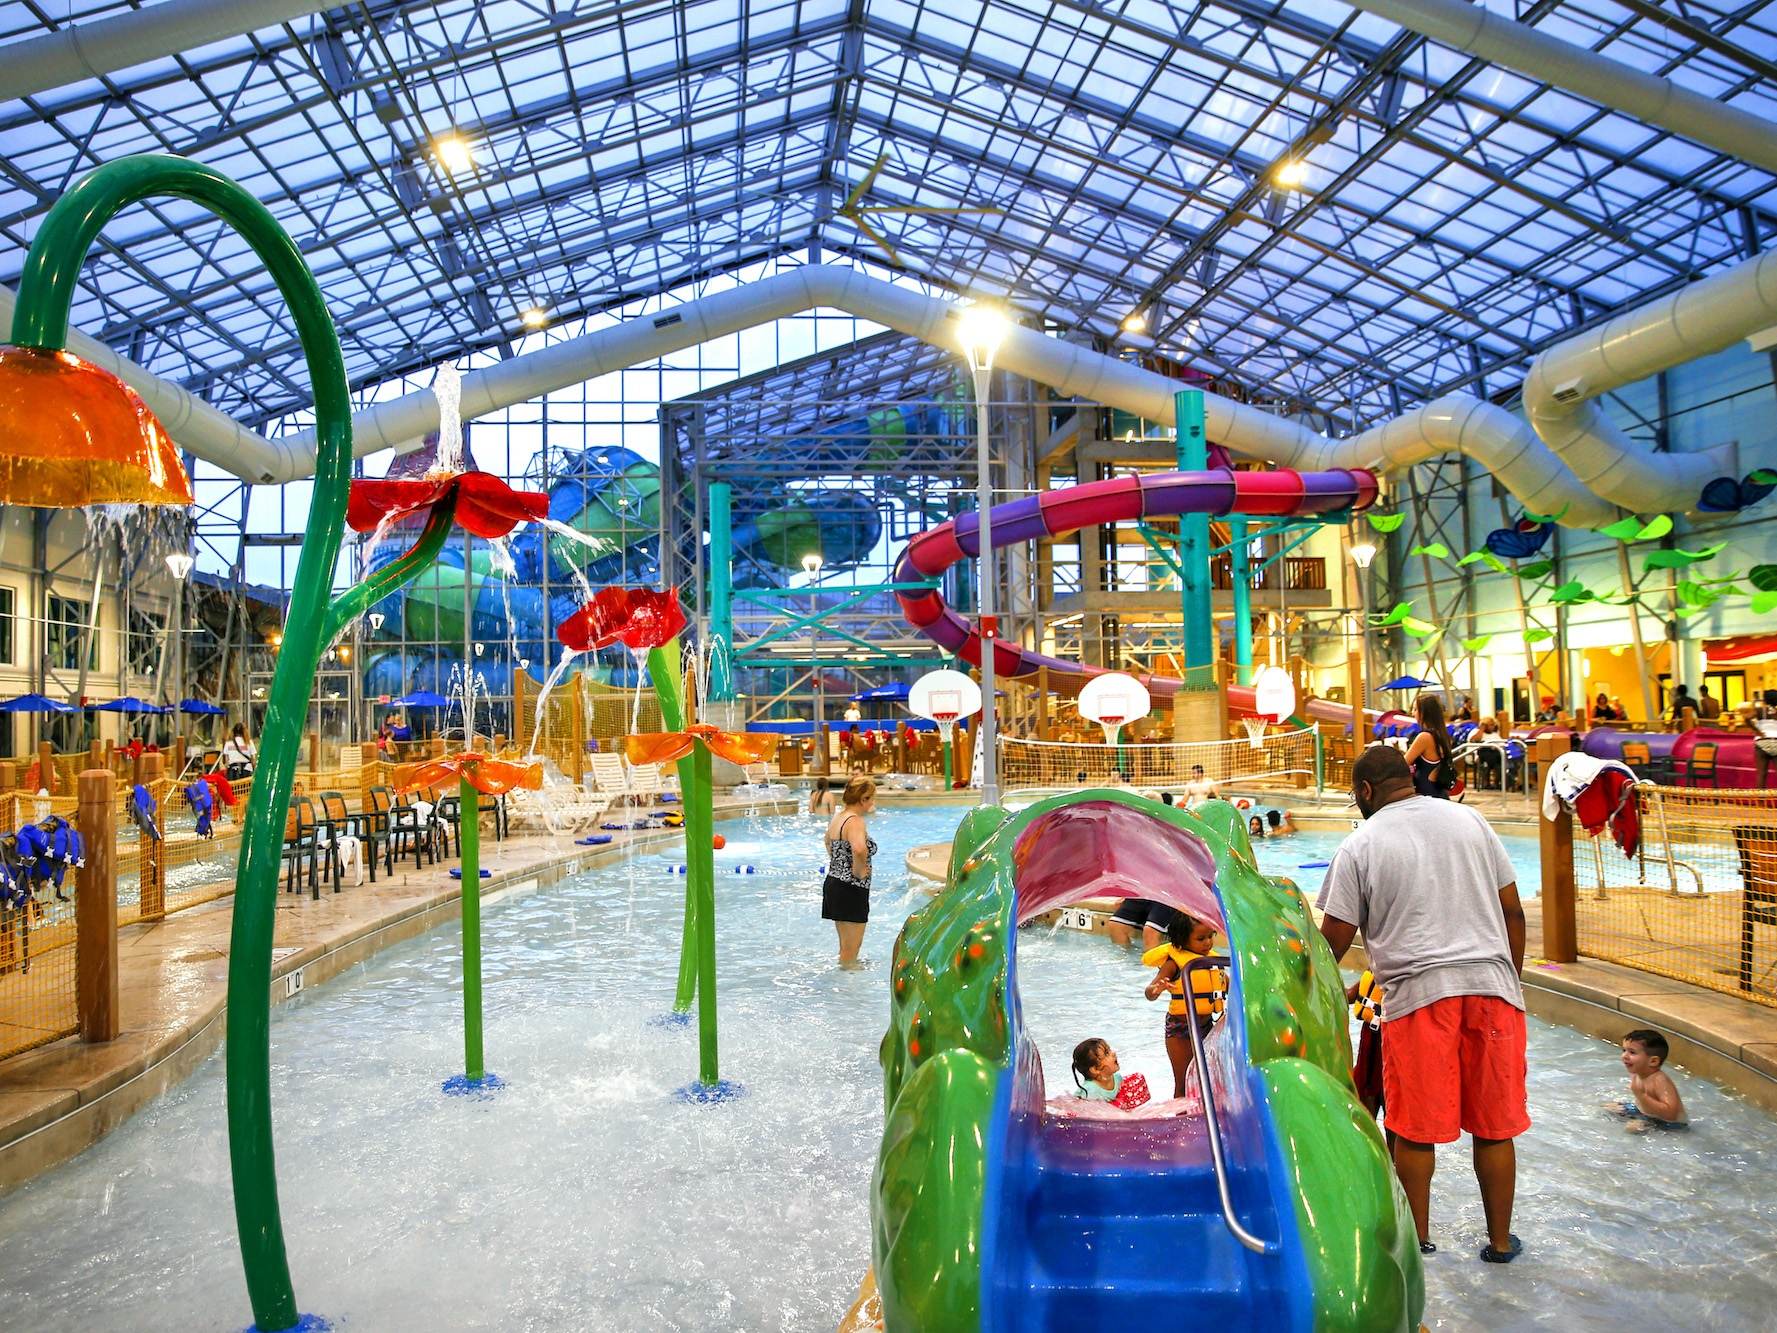 Parent and their children playing carousel at Mid Valley shopping